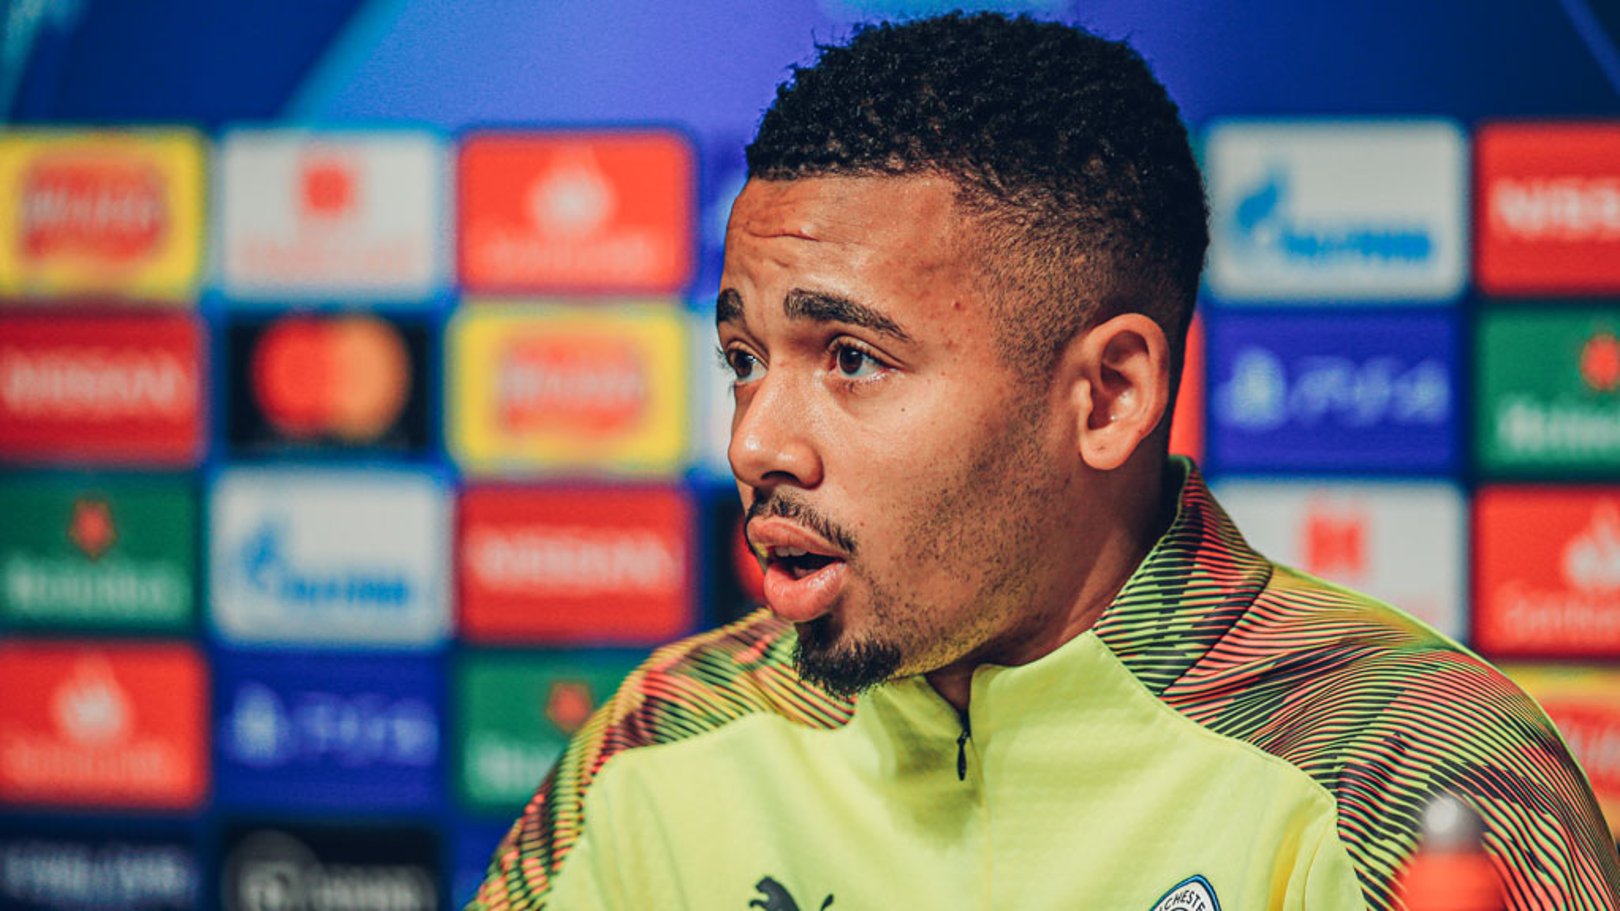 PRE-MATCH: Gabriel Jesus addresses the media ahead of City's game against Shakhtar Donetsk.